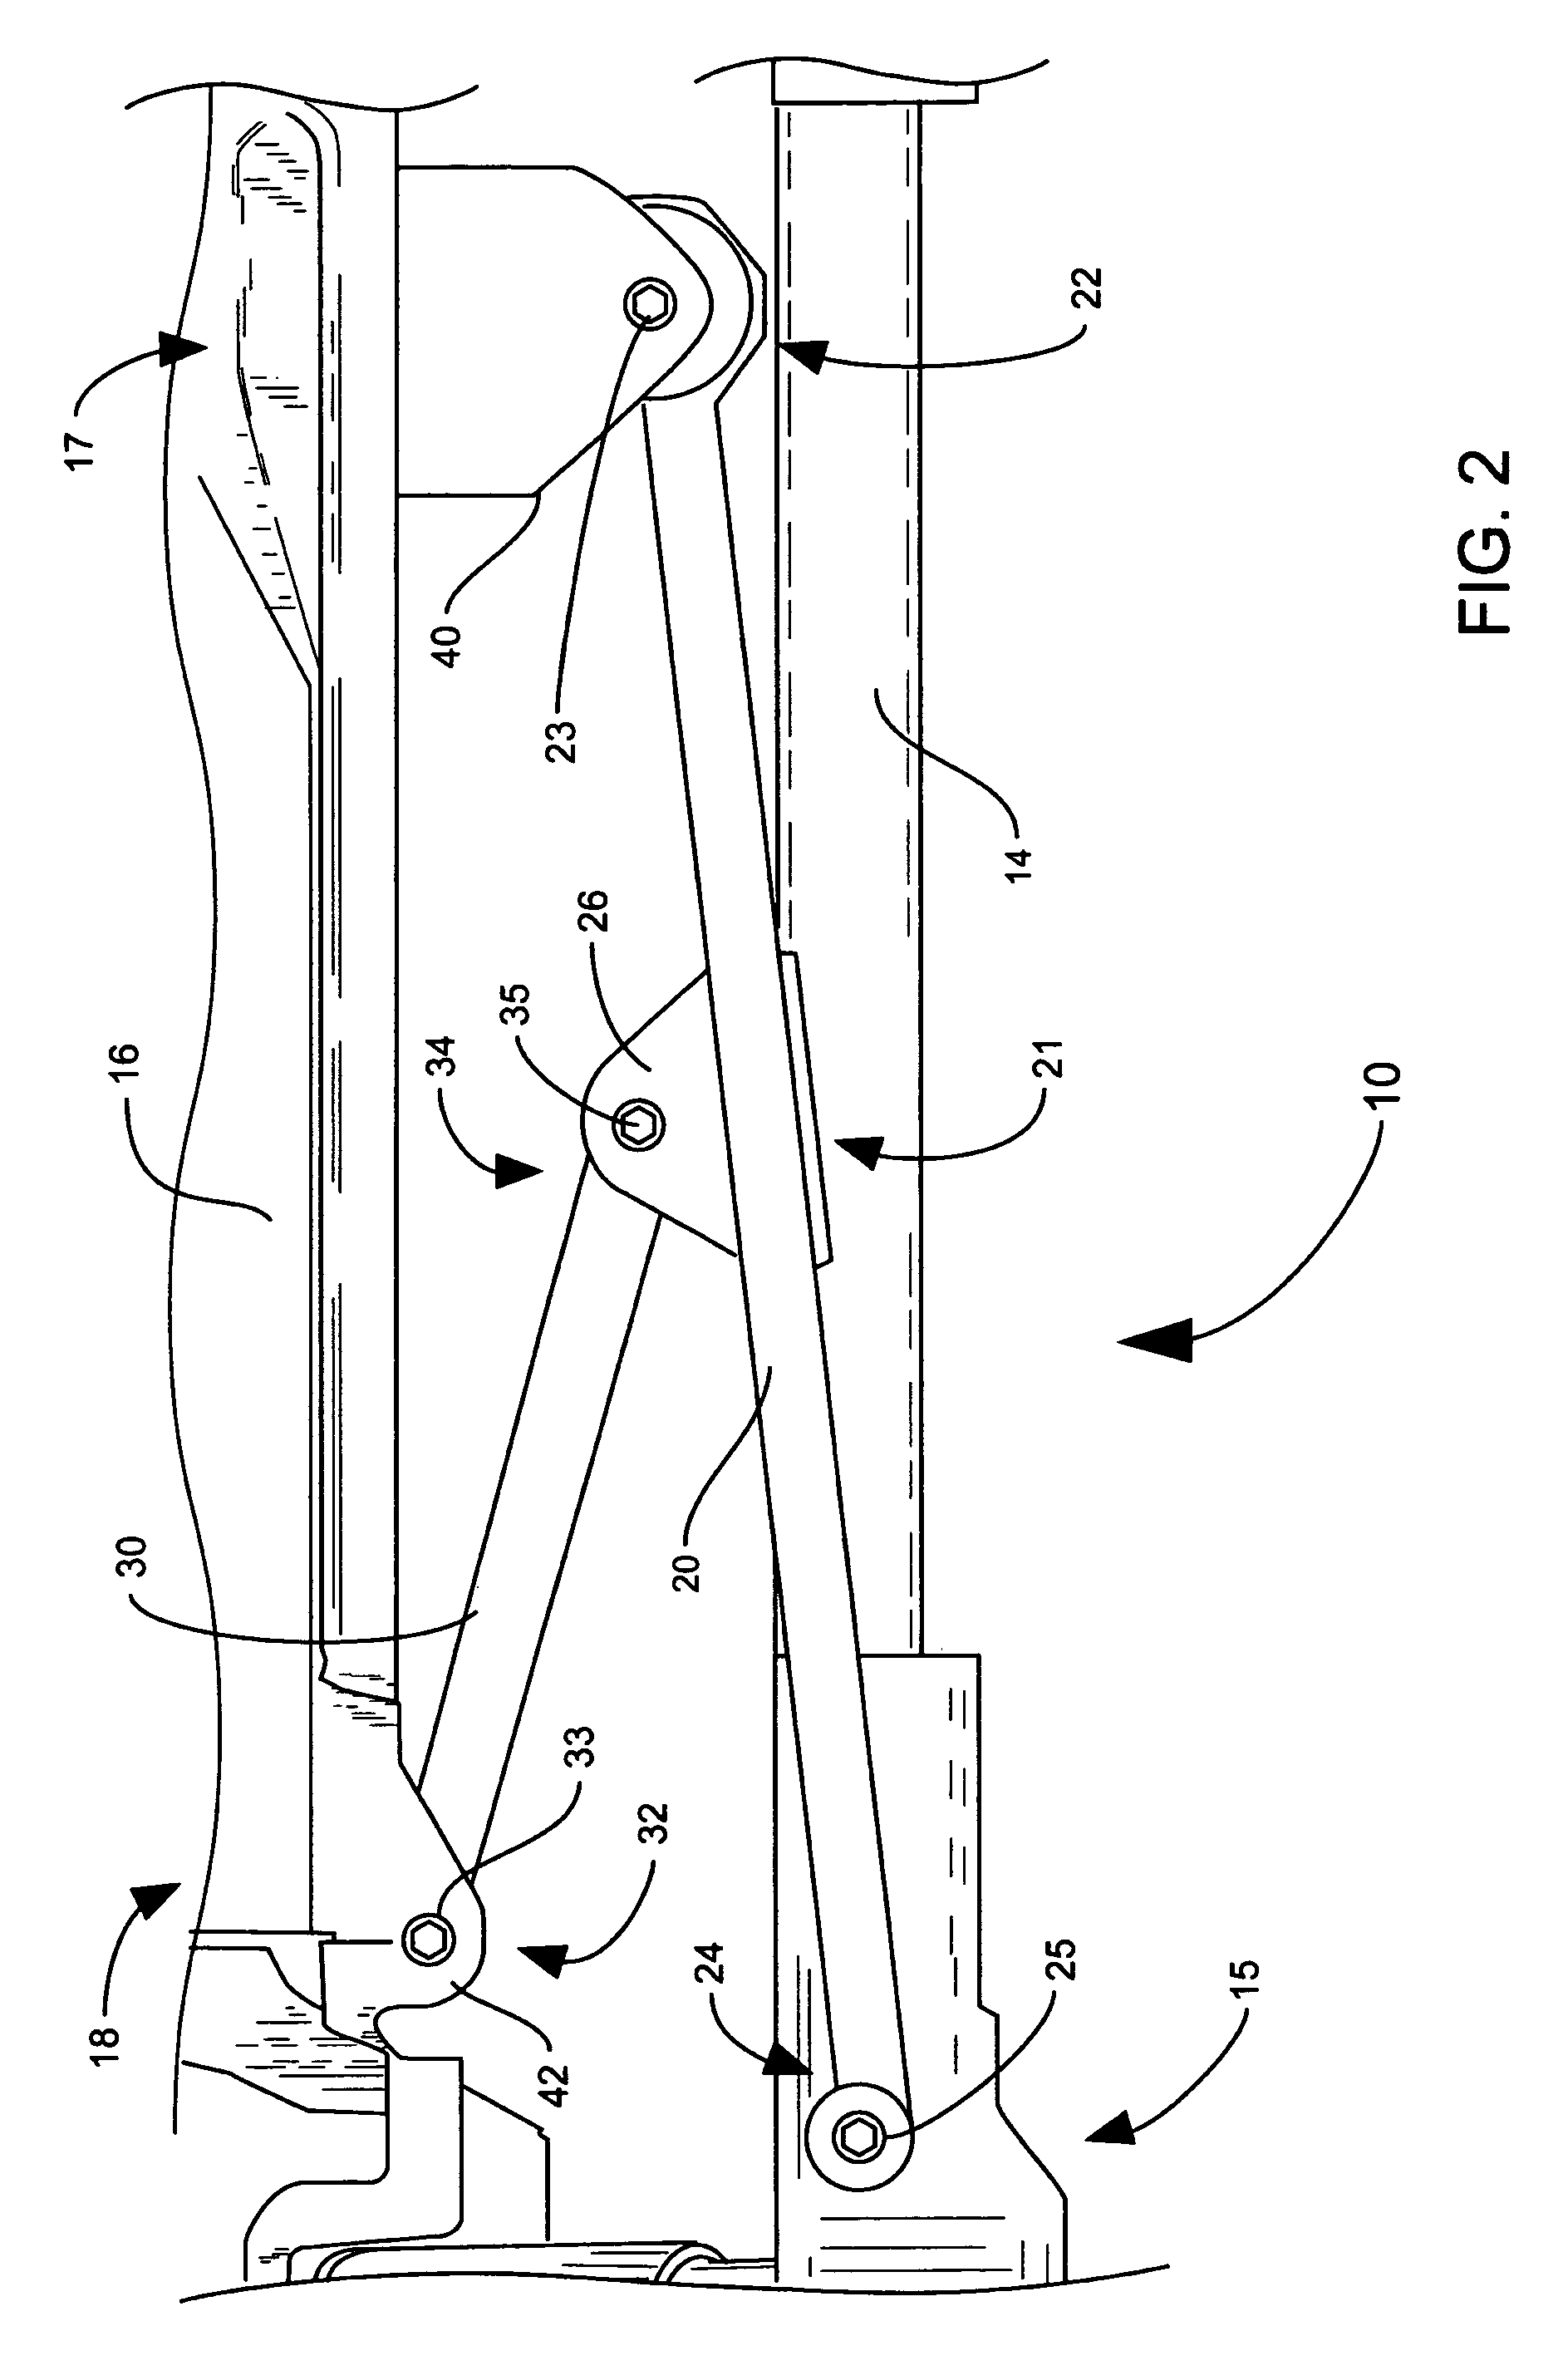 Lateral control mechanism for an axle beam suspension system